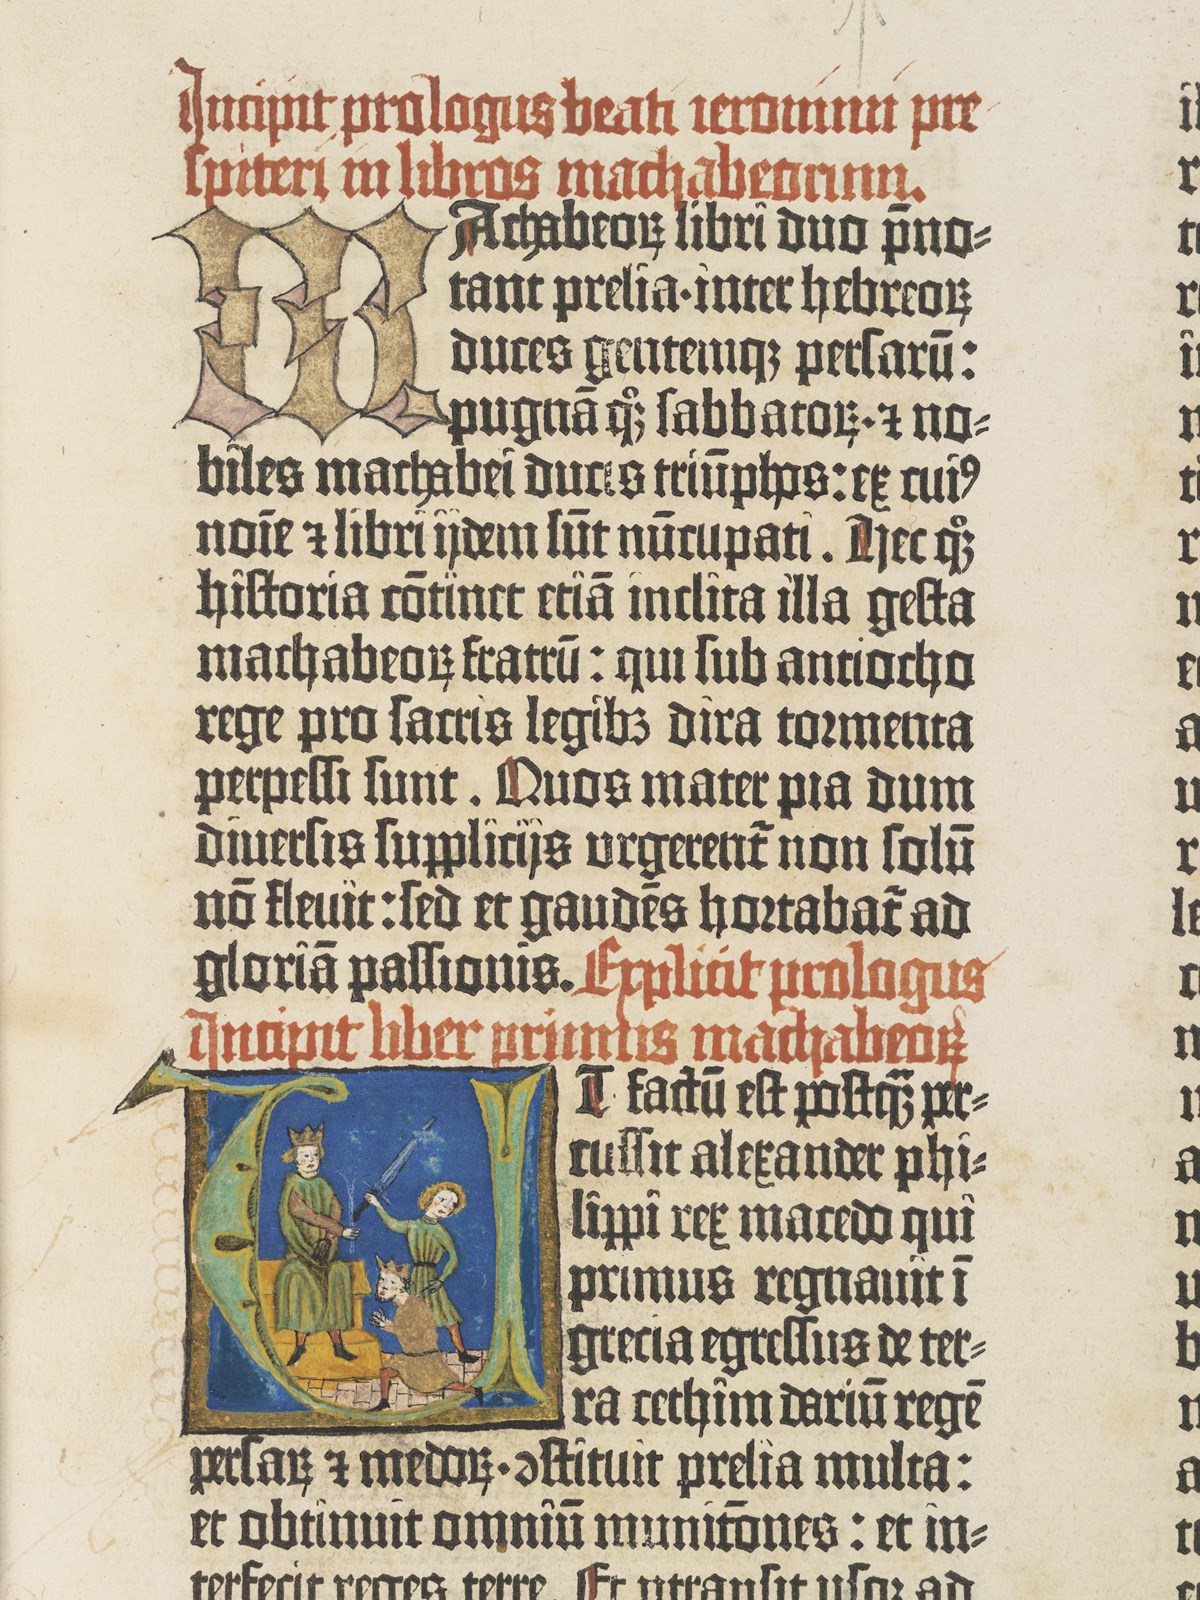 From the National Library of Scotland’s copy of the Gutenberg Bible: Volume 2, the beginning of the Old Testament Book of First Maccabees